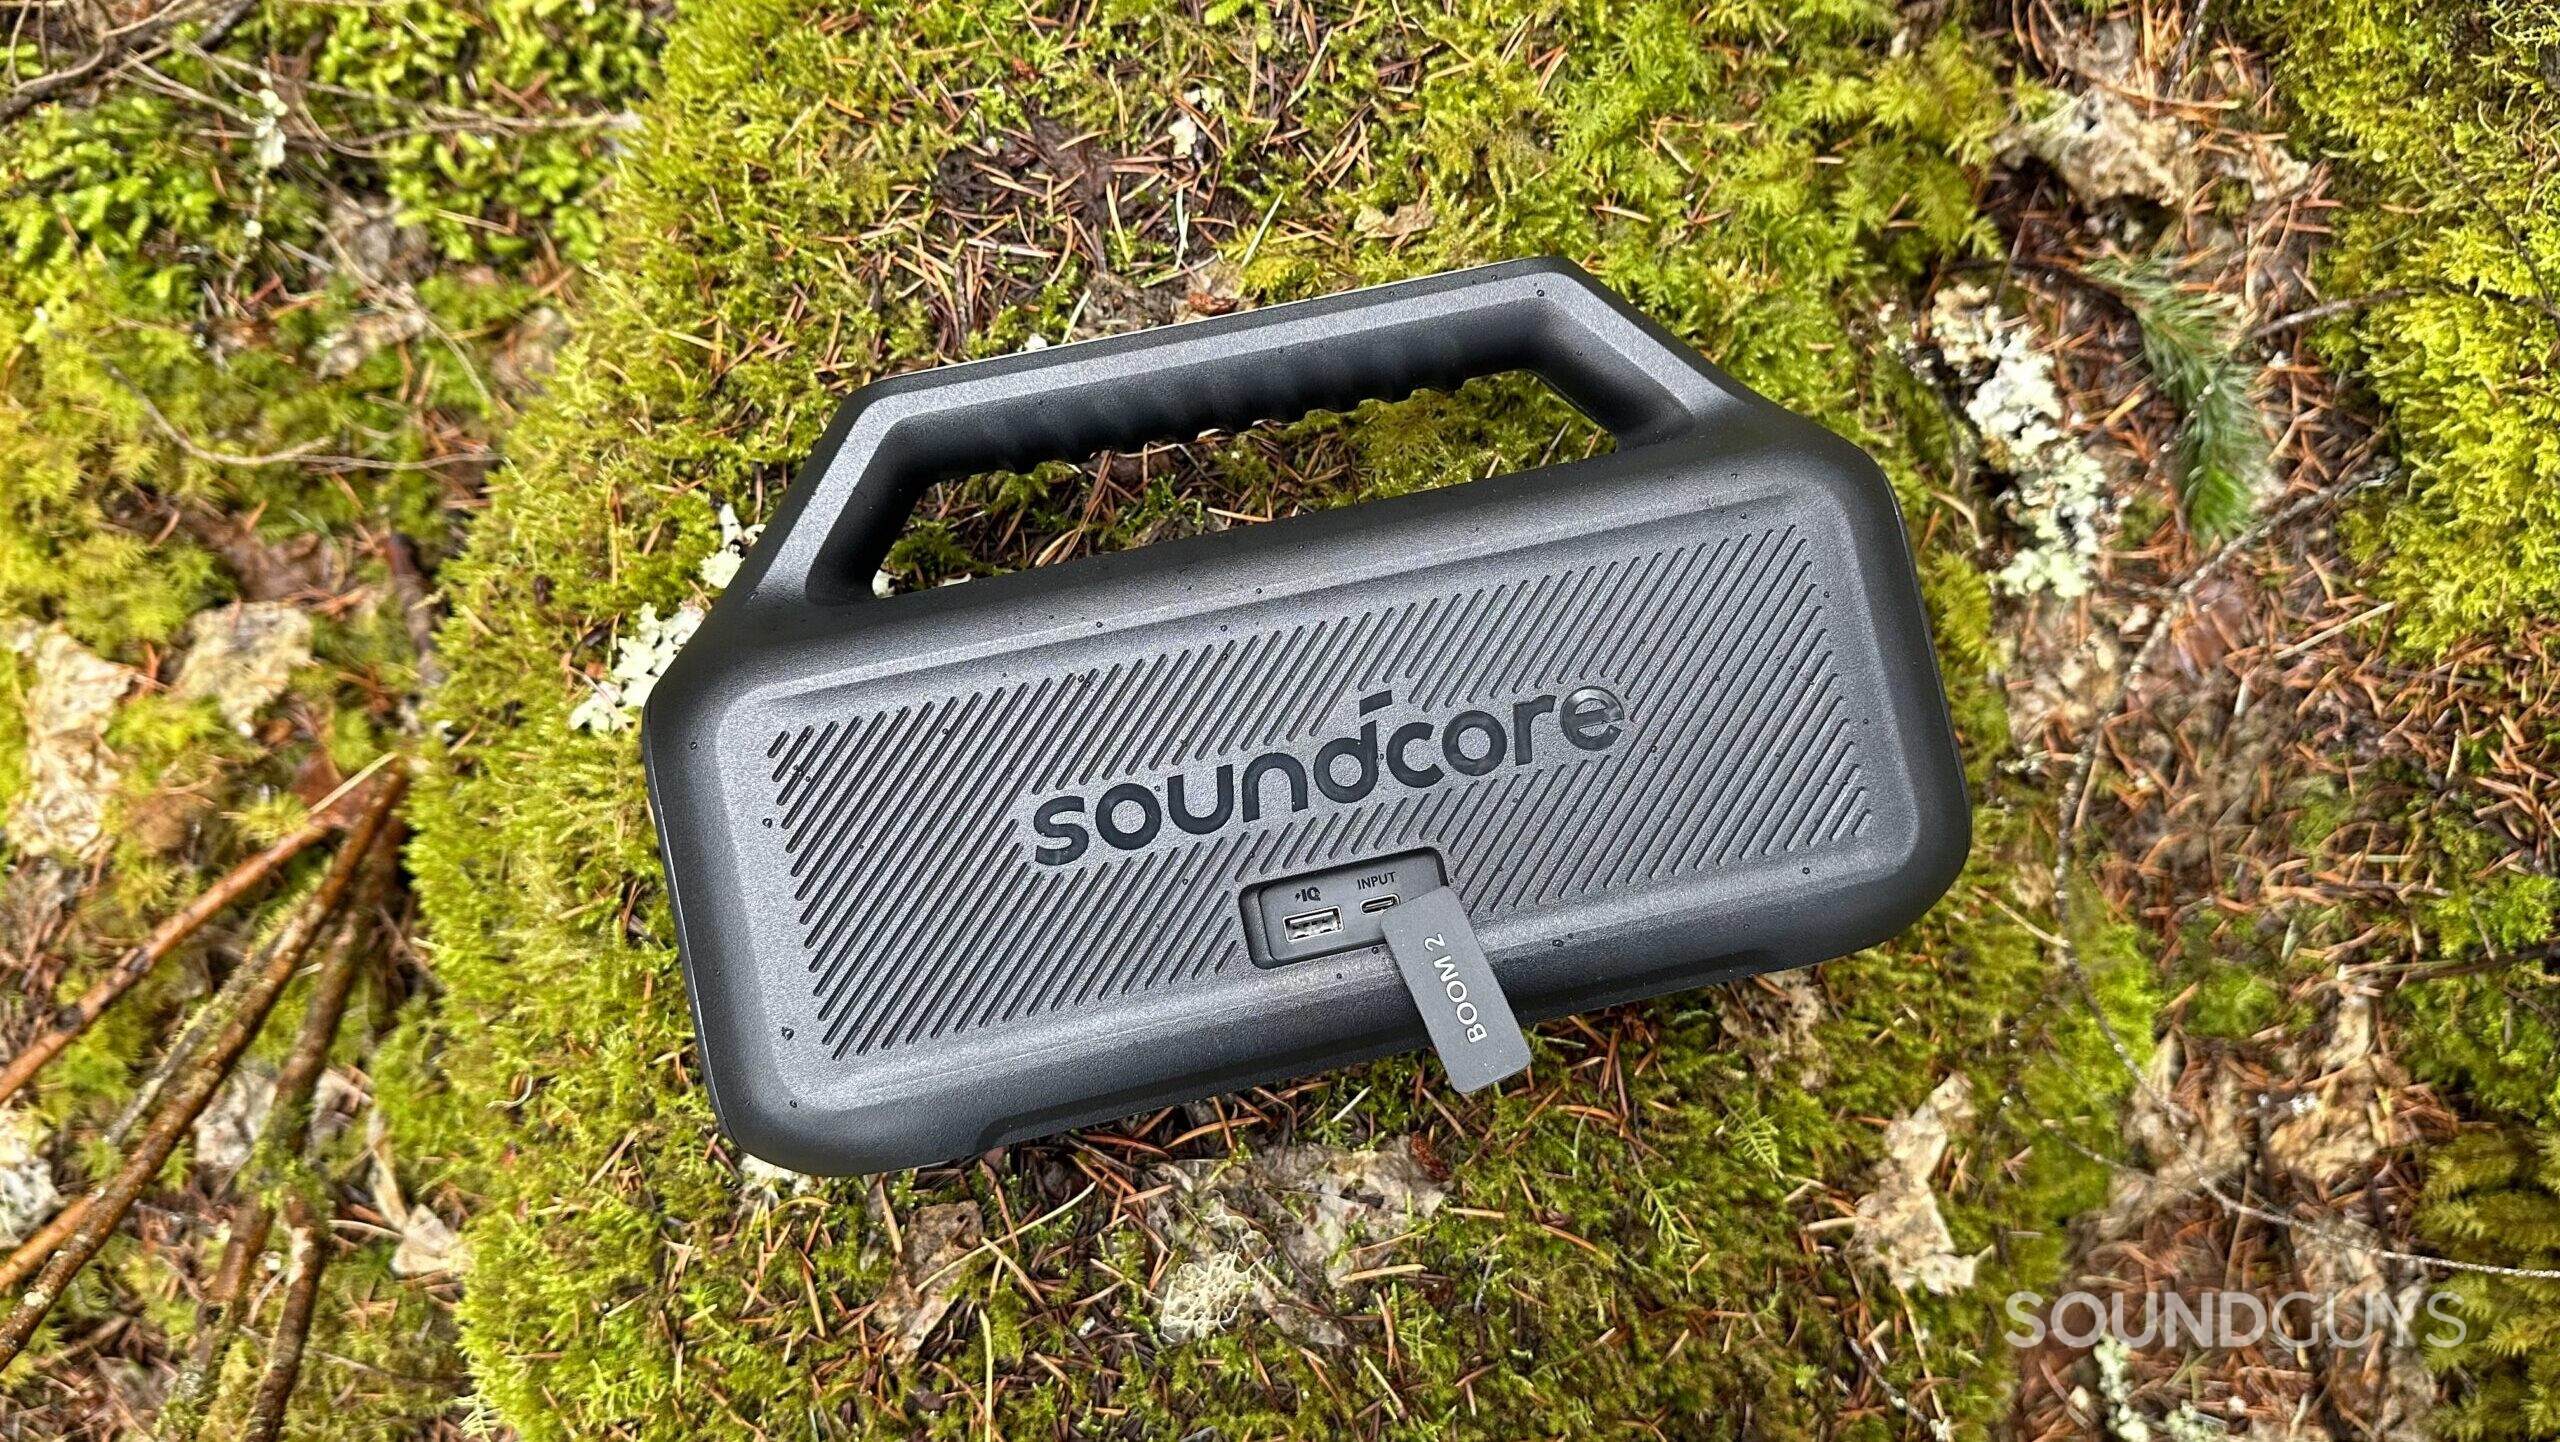 Top view of the back of the Anker Soundcore Boom 2, showing the charging ports.